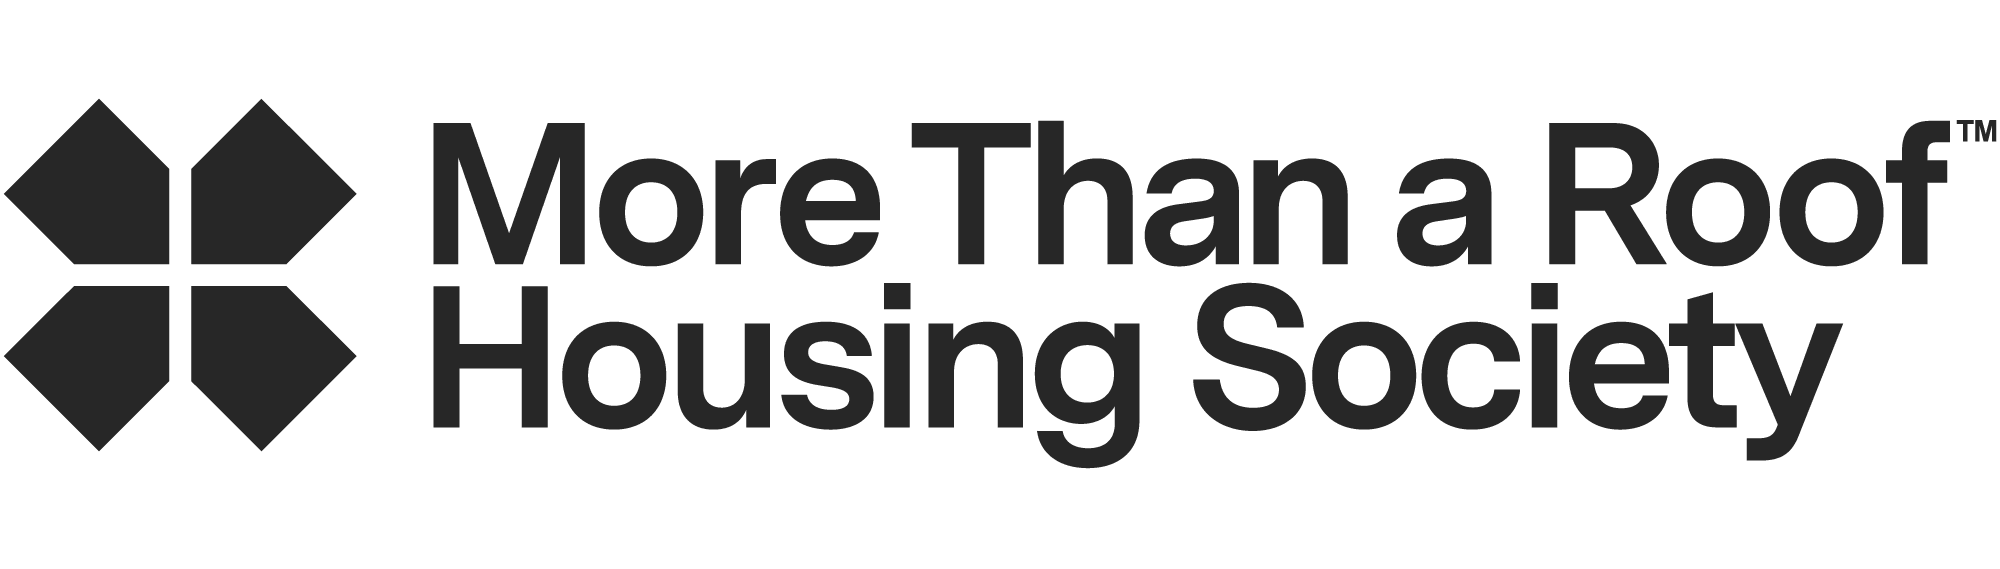 Vancouver affordable housing company